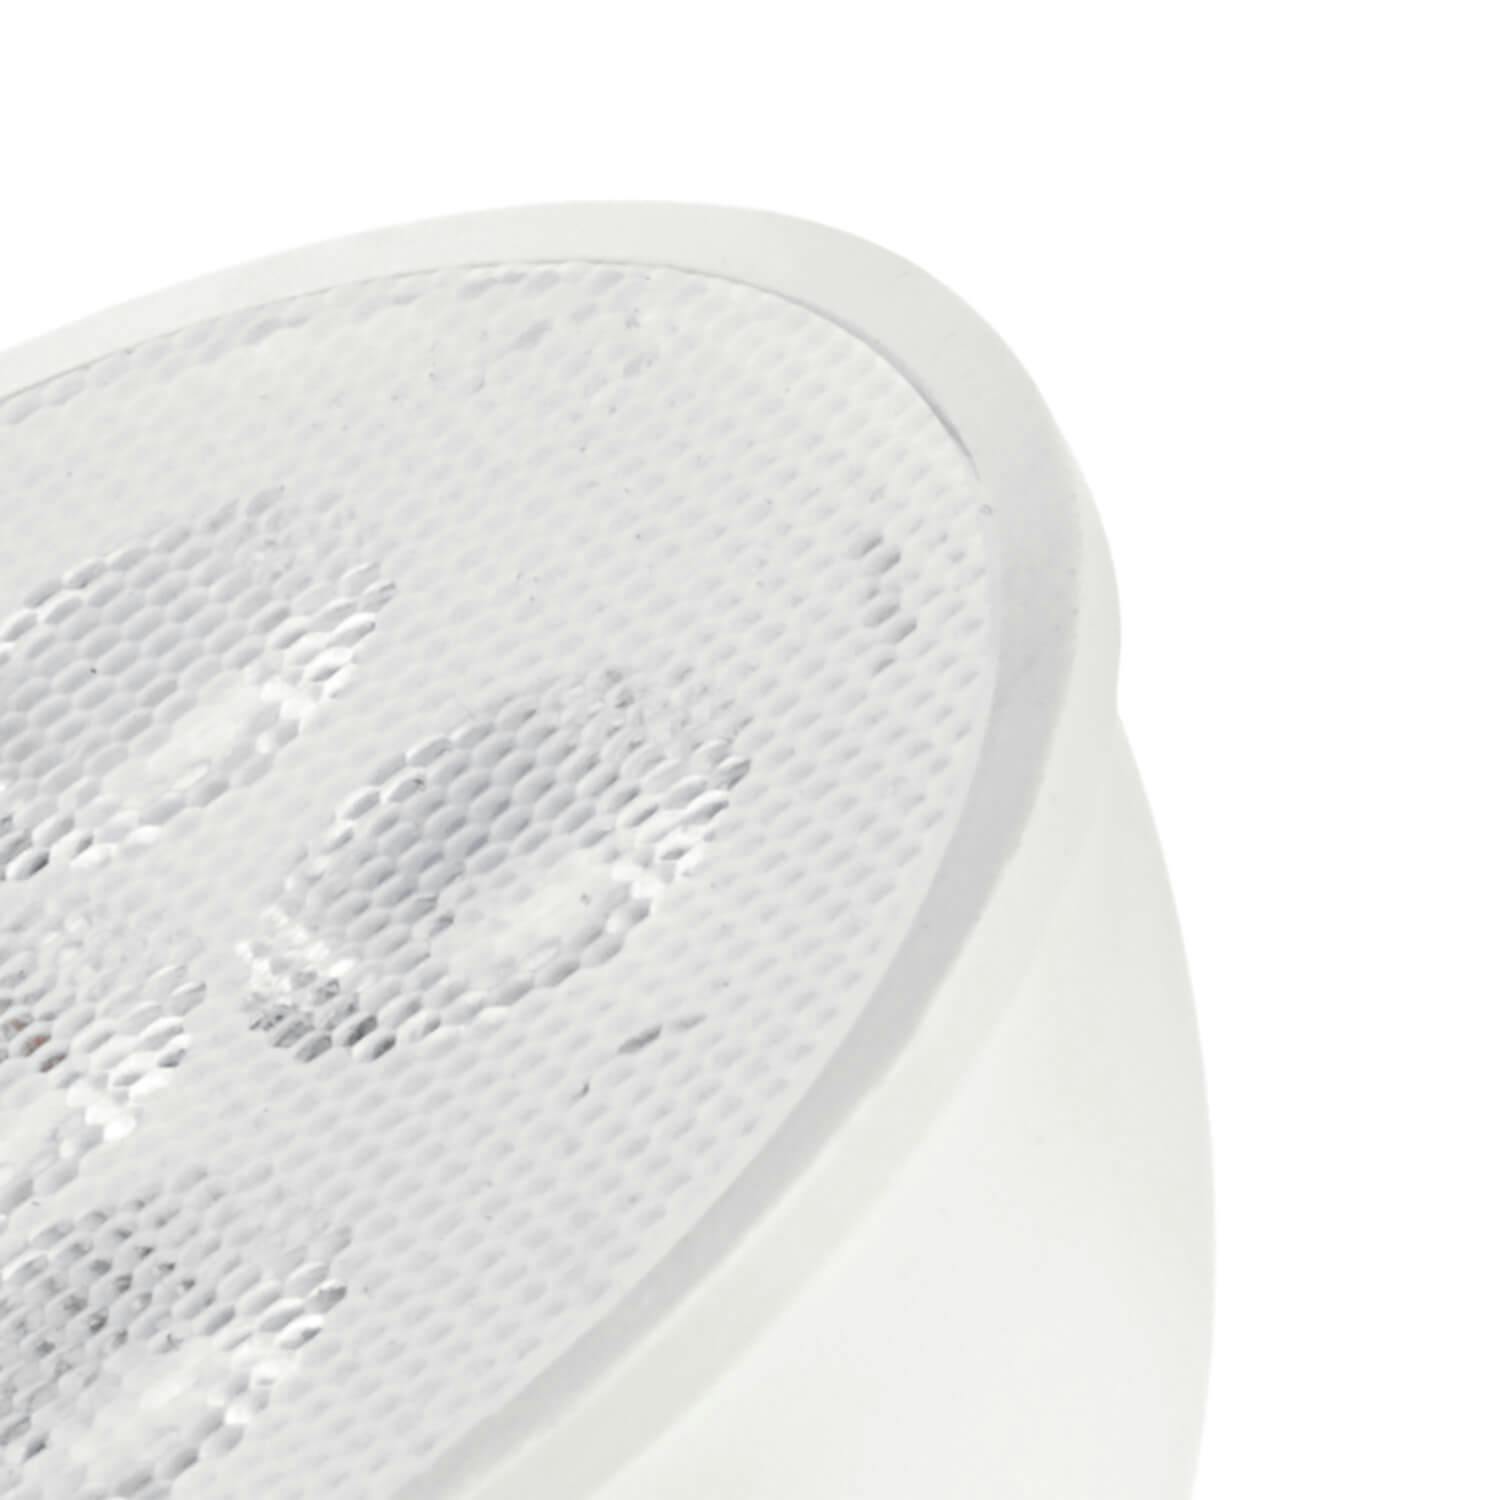 Contractor Series LED Lamp 2700K MR16 330Lm 35Deg Flood on a white background